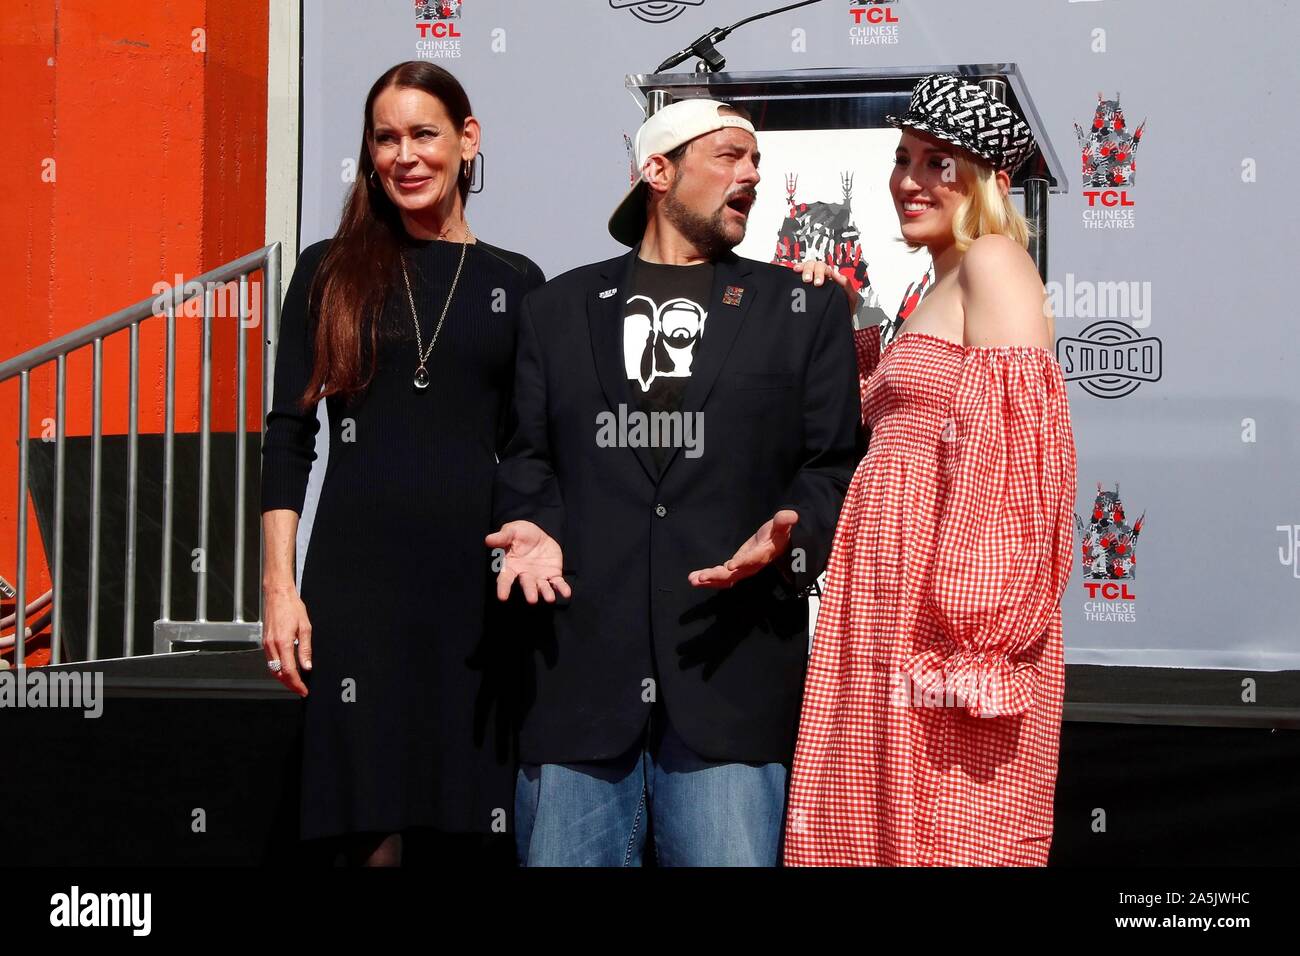 Los Angeles, CA. 14th Oct, 2019. Jennifer Schwalbach Smith, Kevin Smith, Harley Quinn Smith at the induction ceremony for Kevin Smith and Jason Mewes Handprint & Footprint Ceremony, TCL Chinese Theatre (formerly Grauman's), Los Angeles, CA October 14, 2019. Credit: Priscilla Grant/Everett Collection/Alamy Live News Stock Photo